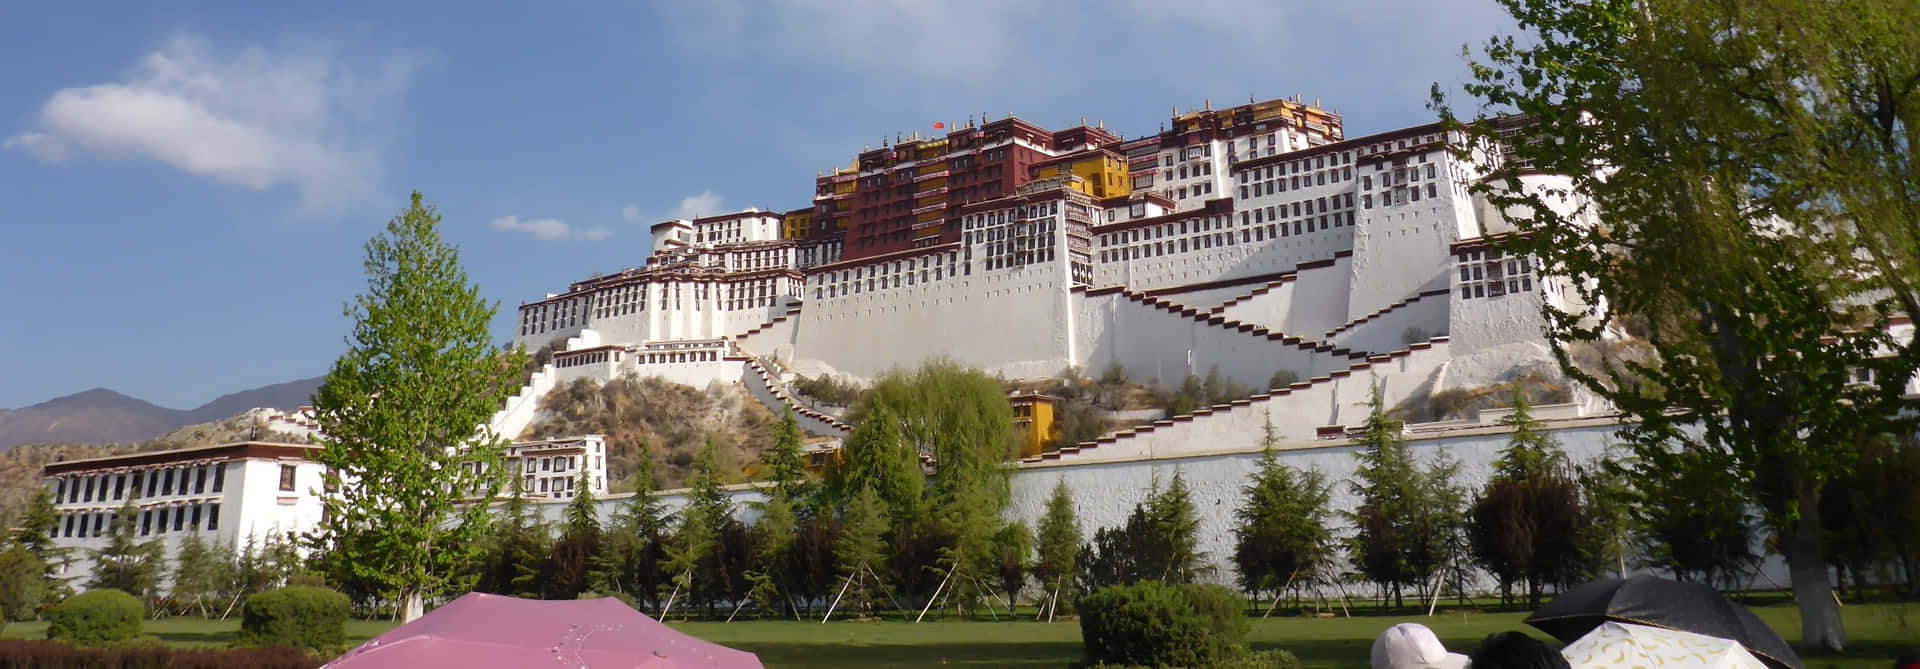 Shot From The Ground Of Potala Palace In Lhasa Wallpaper